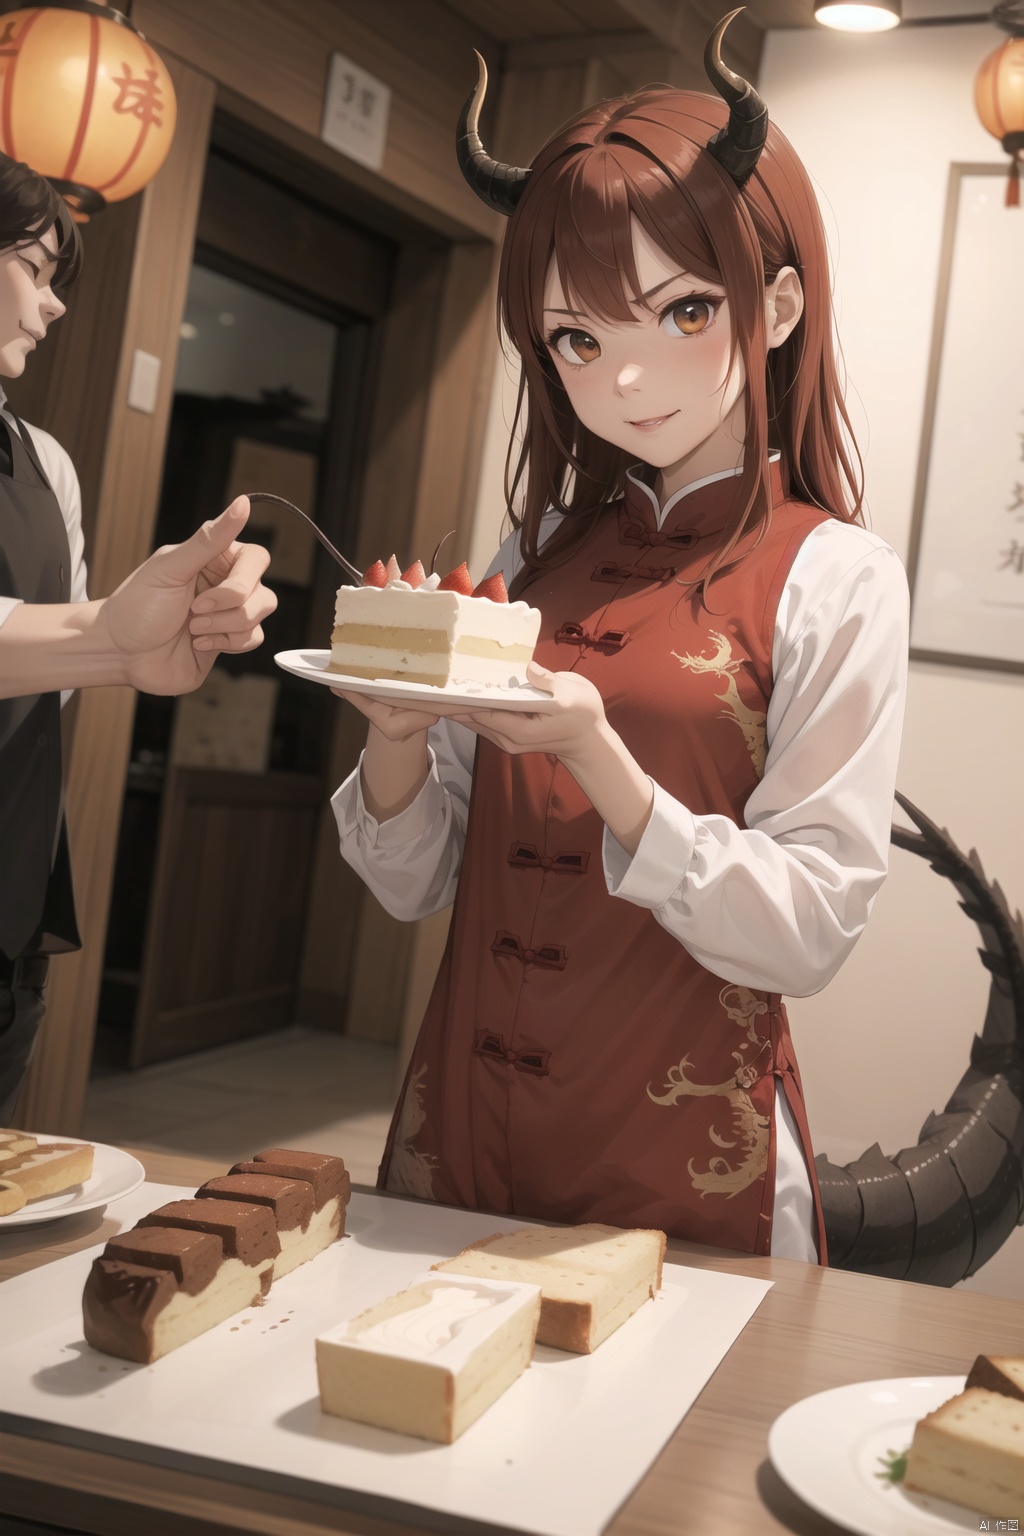  lbbd,ragon,red,anger,angry,horns,tail,dragon tail,red hair,dragon horns,standing,smile, chinese, dofas,chinese new year,eat cake,bread eating